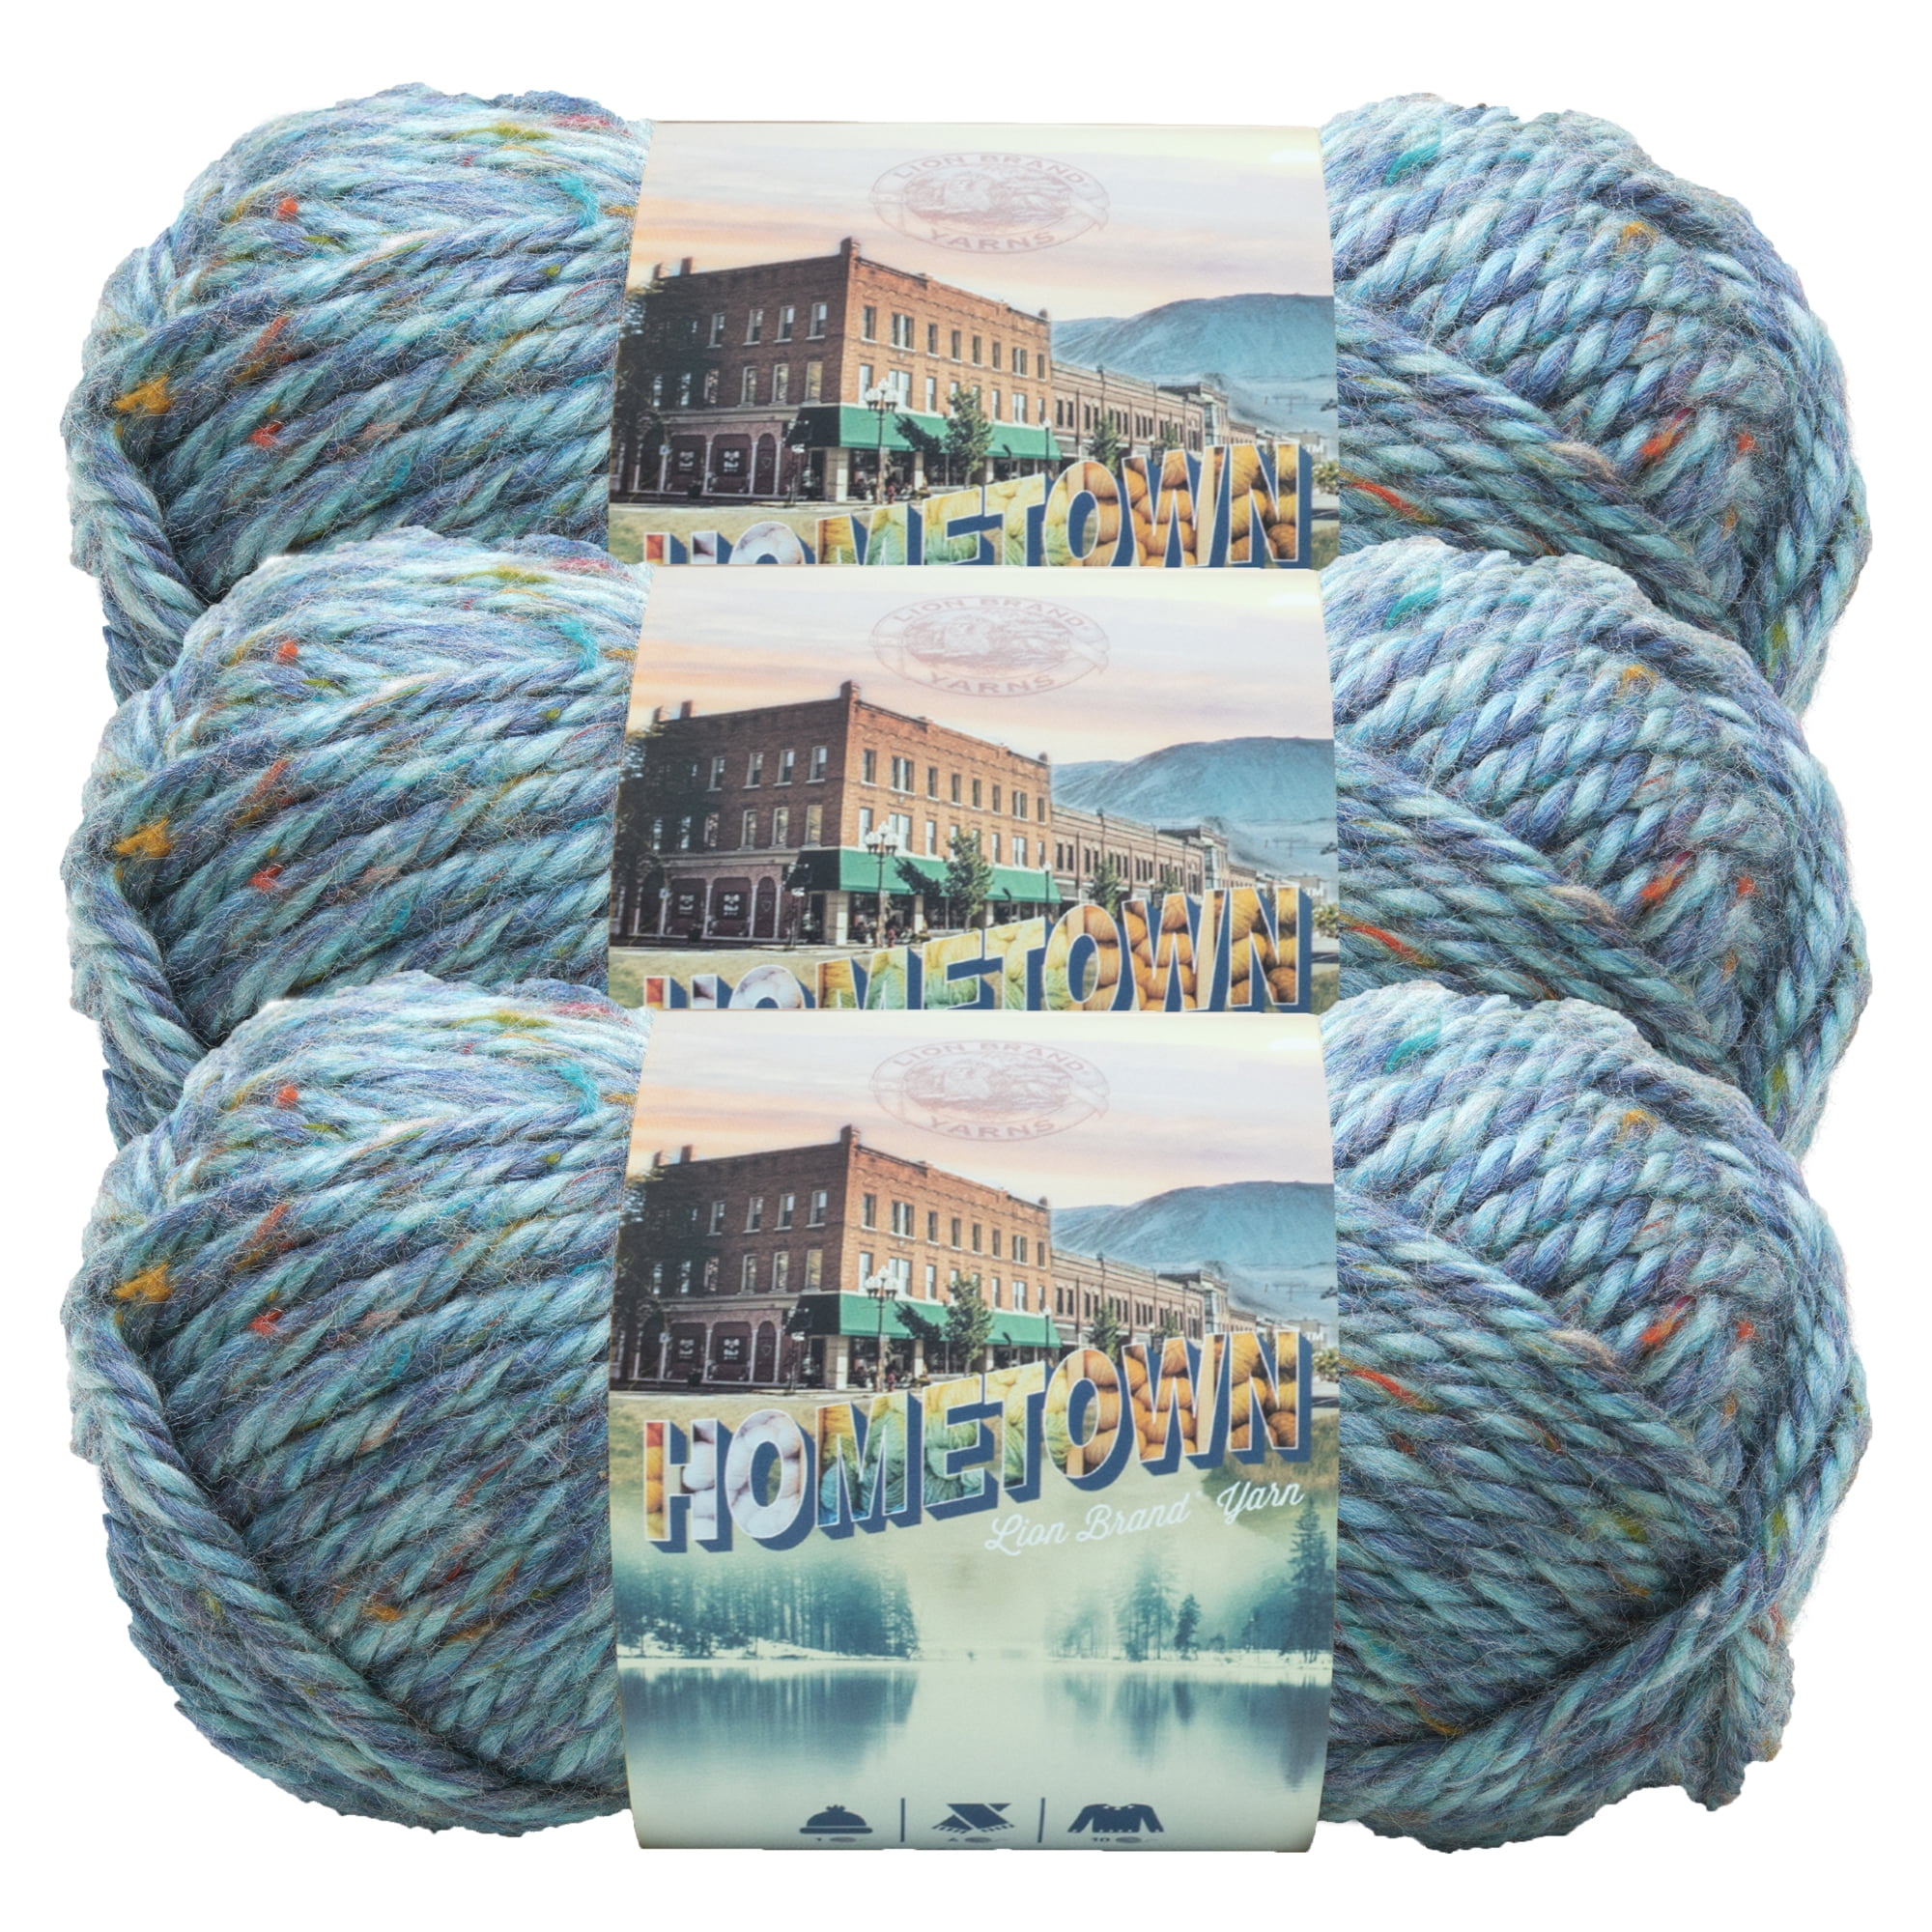 Lion Brand Hometown USA Yarn, Soft and Super Bulky, Two Rare Colorways  Available 